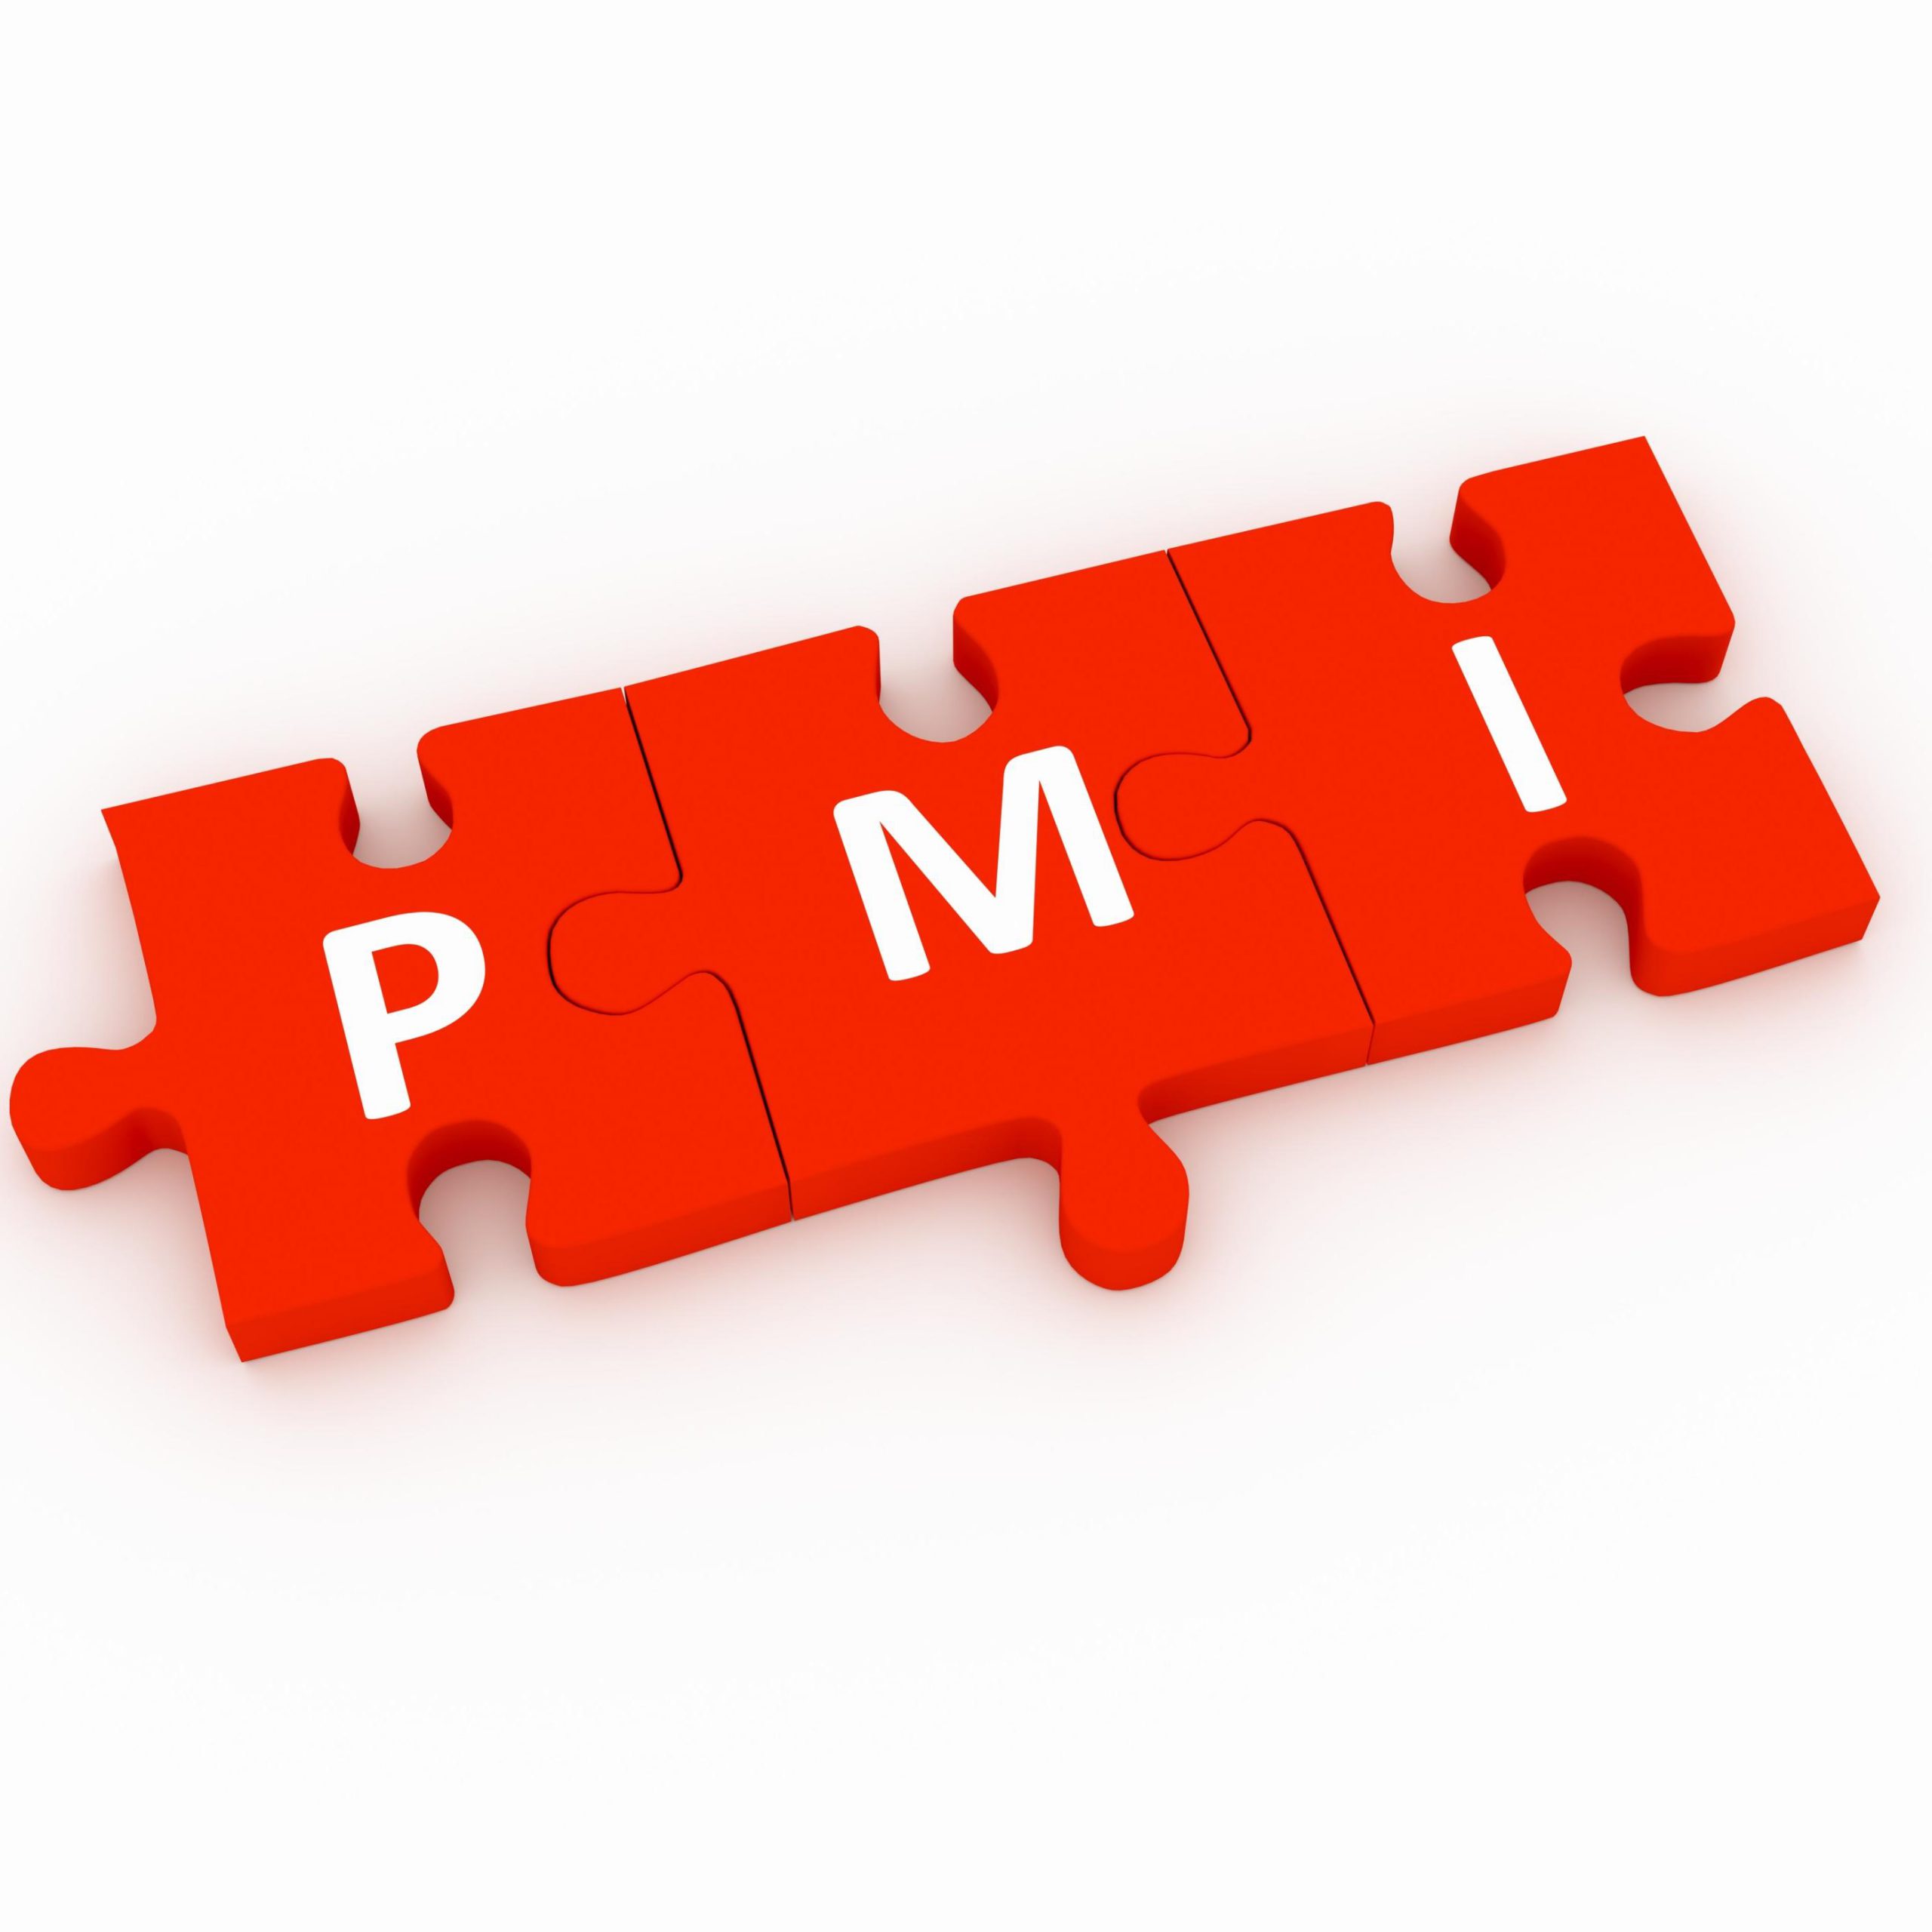 PMI services expand at a slower pace in March on surge in Covid cases